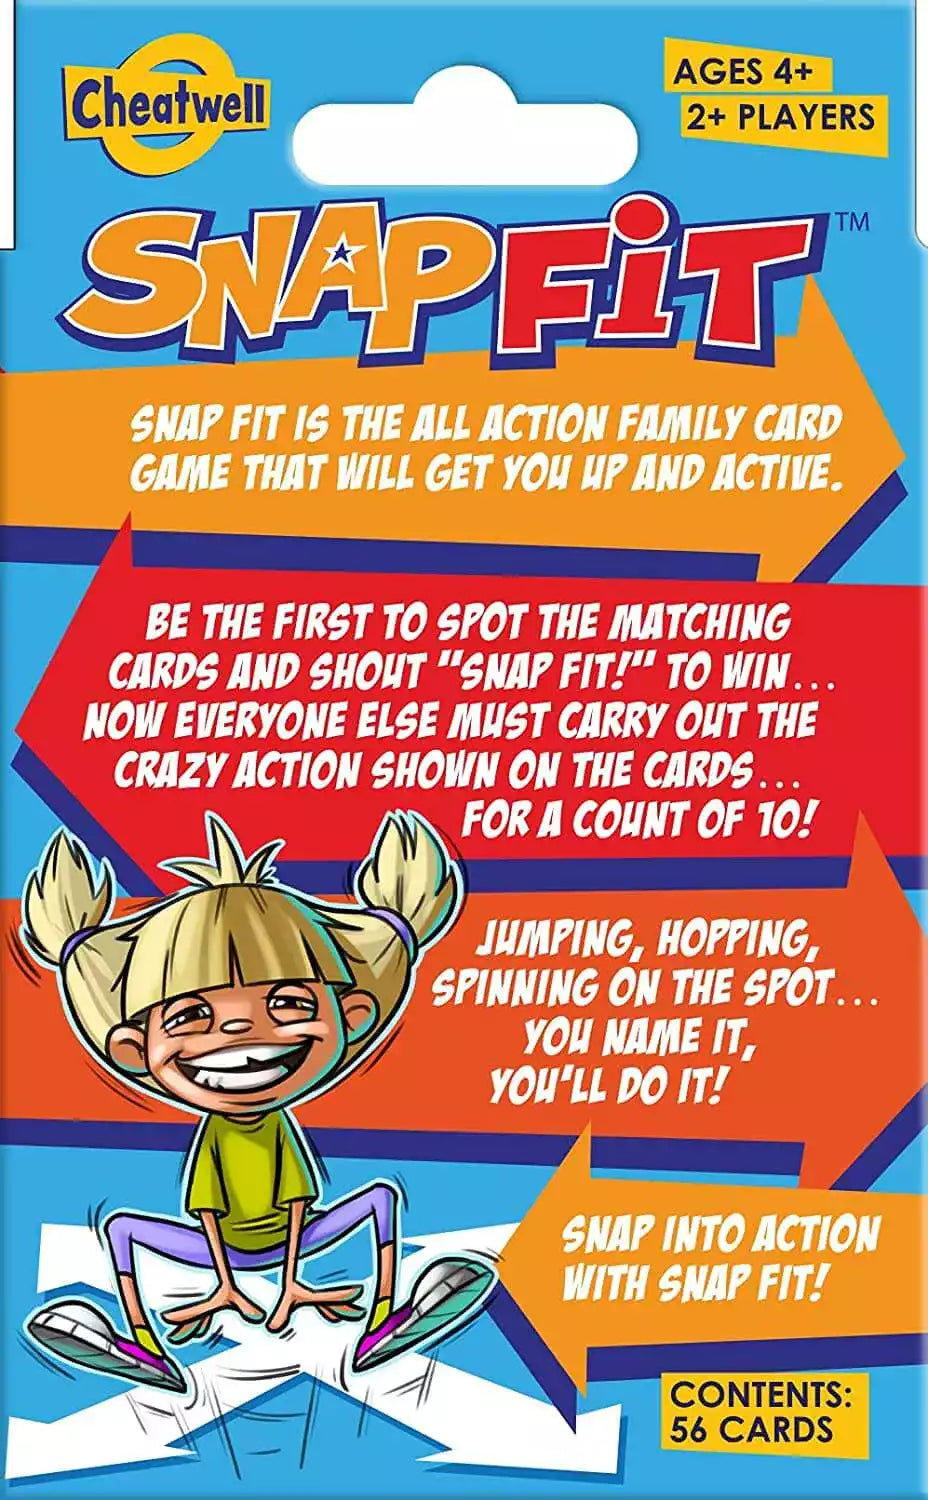 shop snap fit card game for children from cheatwell games